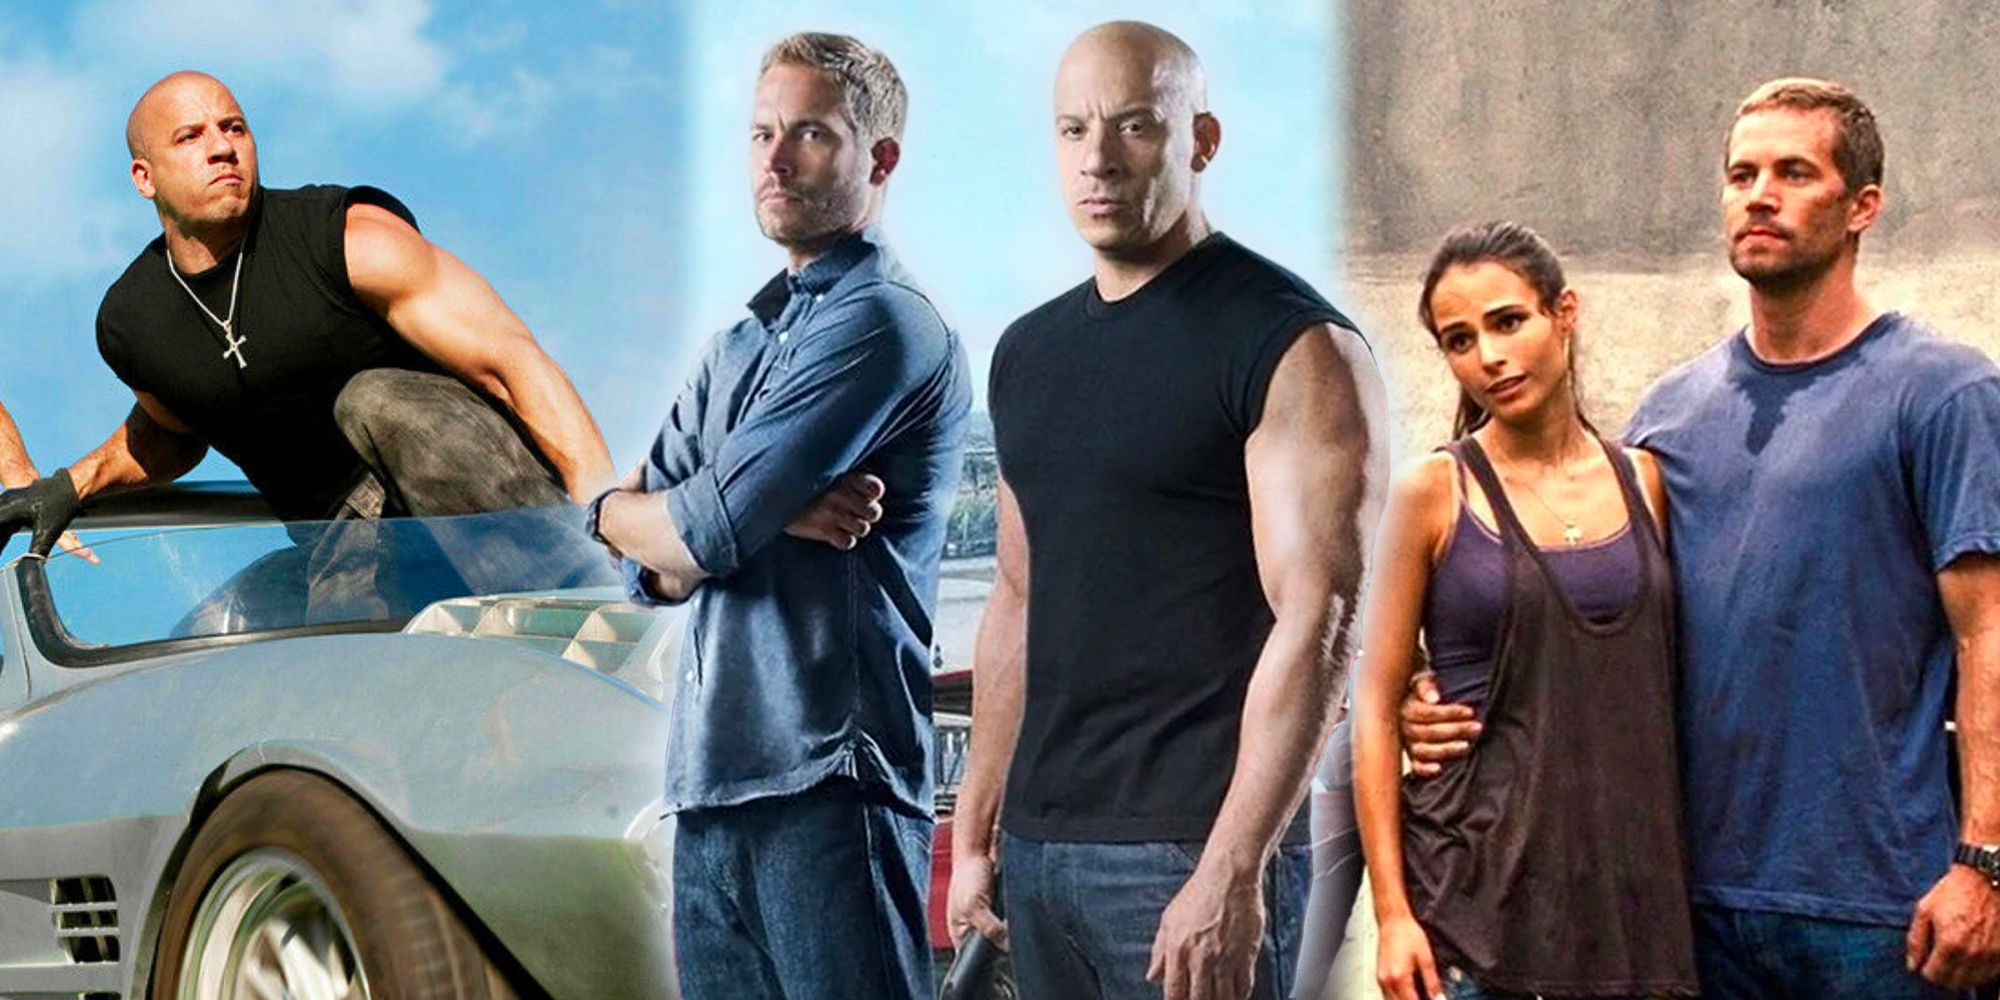 A collage photo of Dom sitting on the bonnet of a car, Brian and Dom standing together, and Brian and Mia. All images from Fast Five